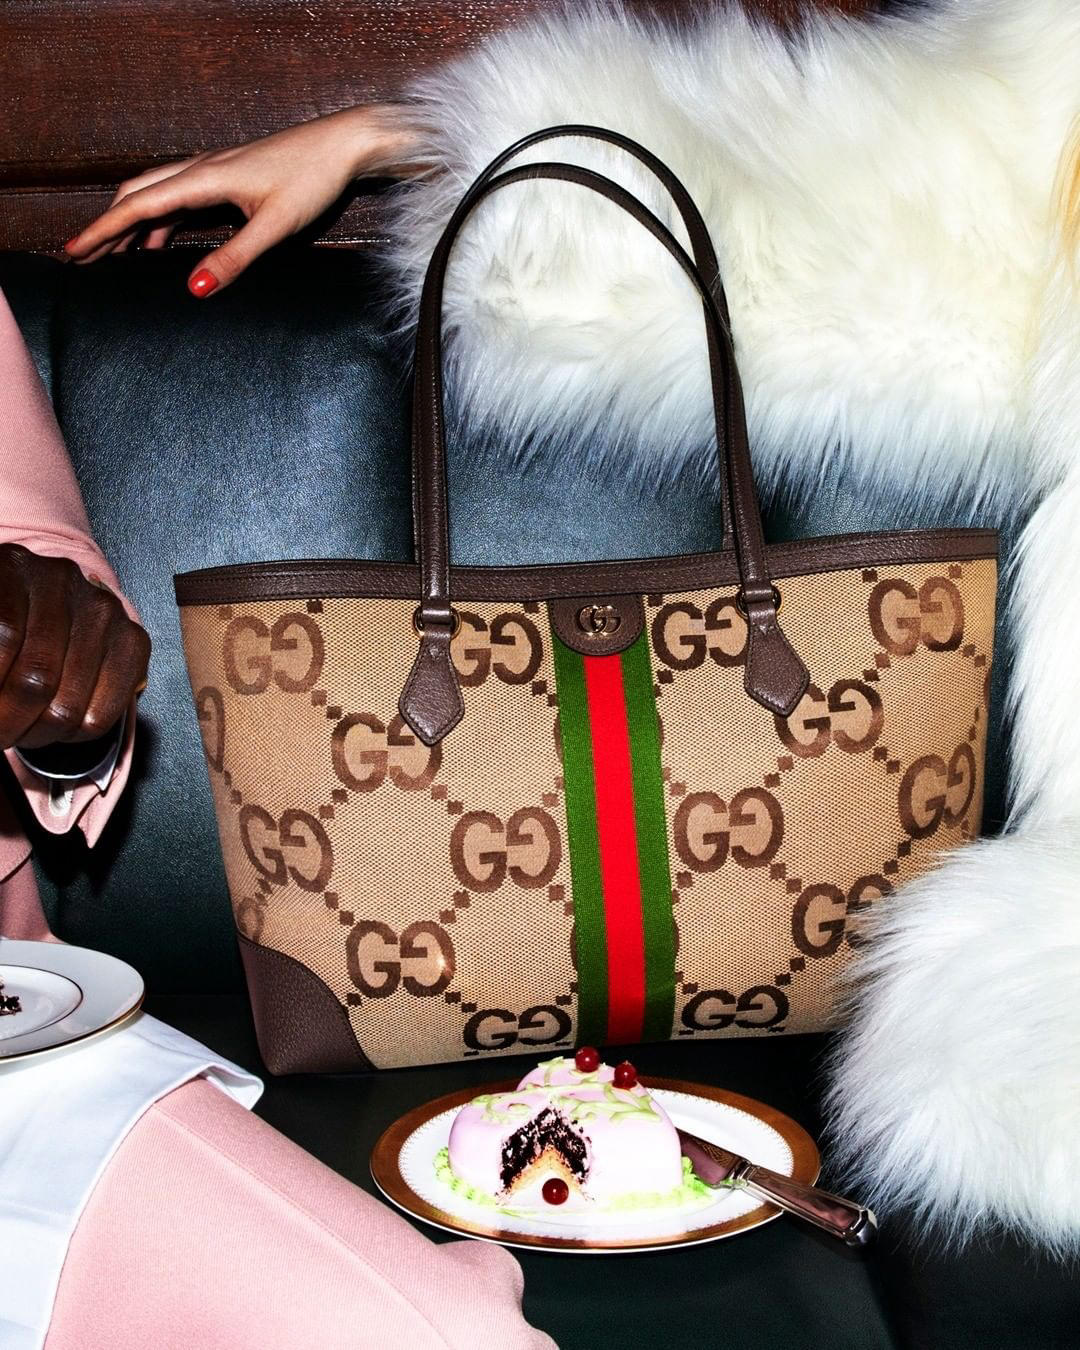 Since its introduction into Gucci’s repertoire of motifs, the GG monogram has provided a canvas to p